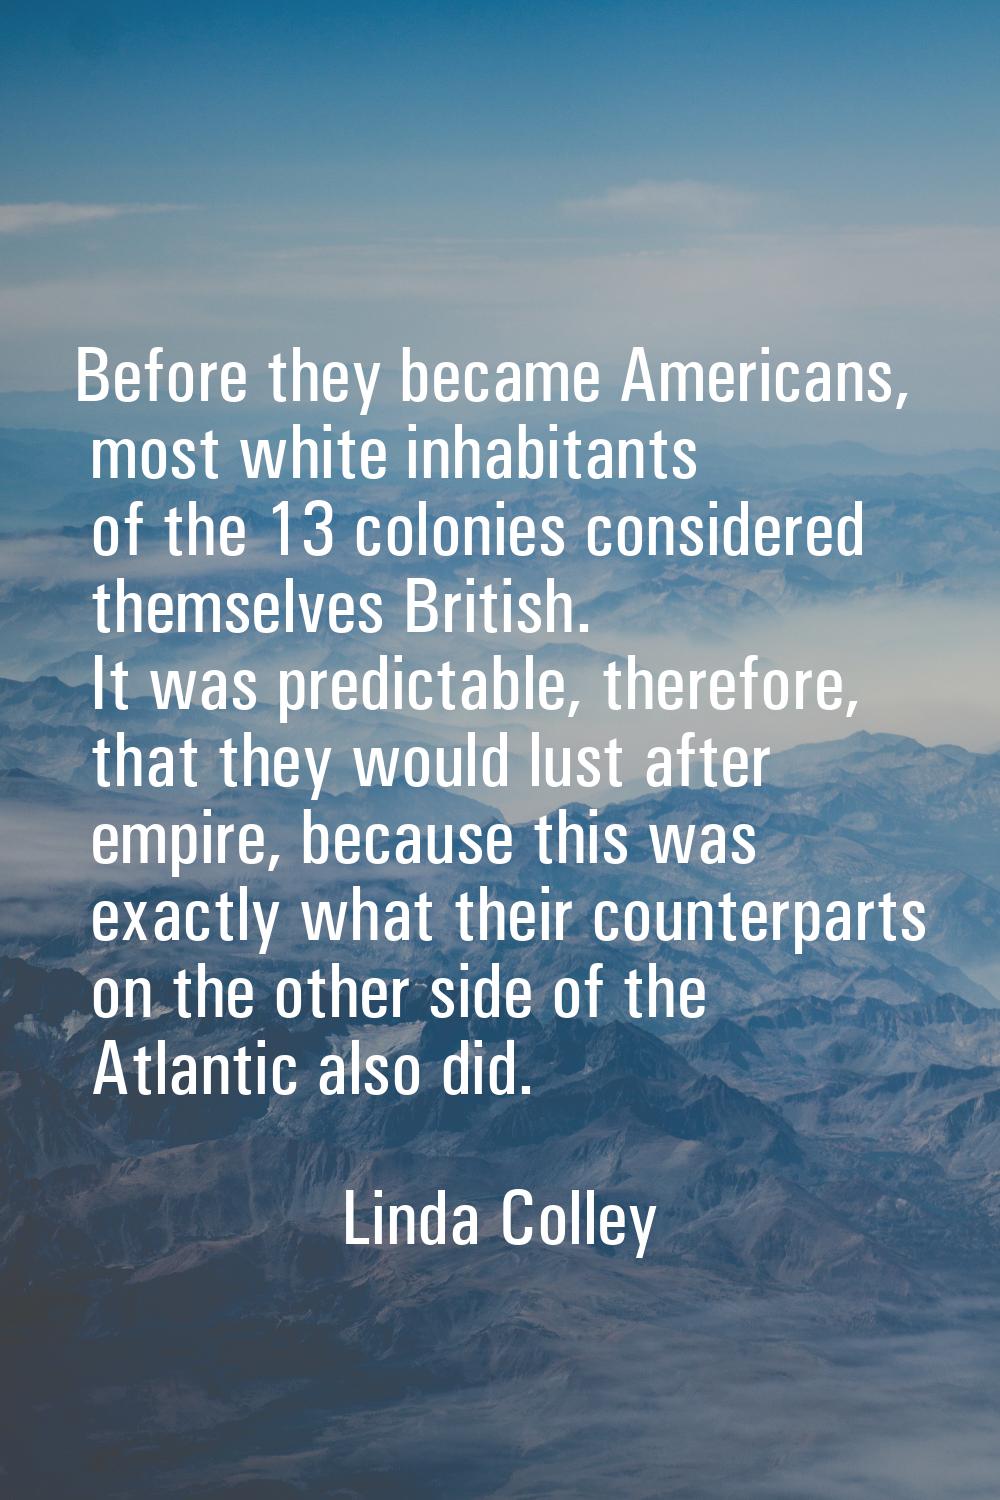 Before they became Americans, most white inhabitants of the 13 colonies considered themselves Briti